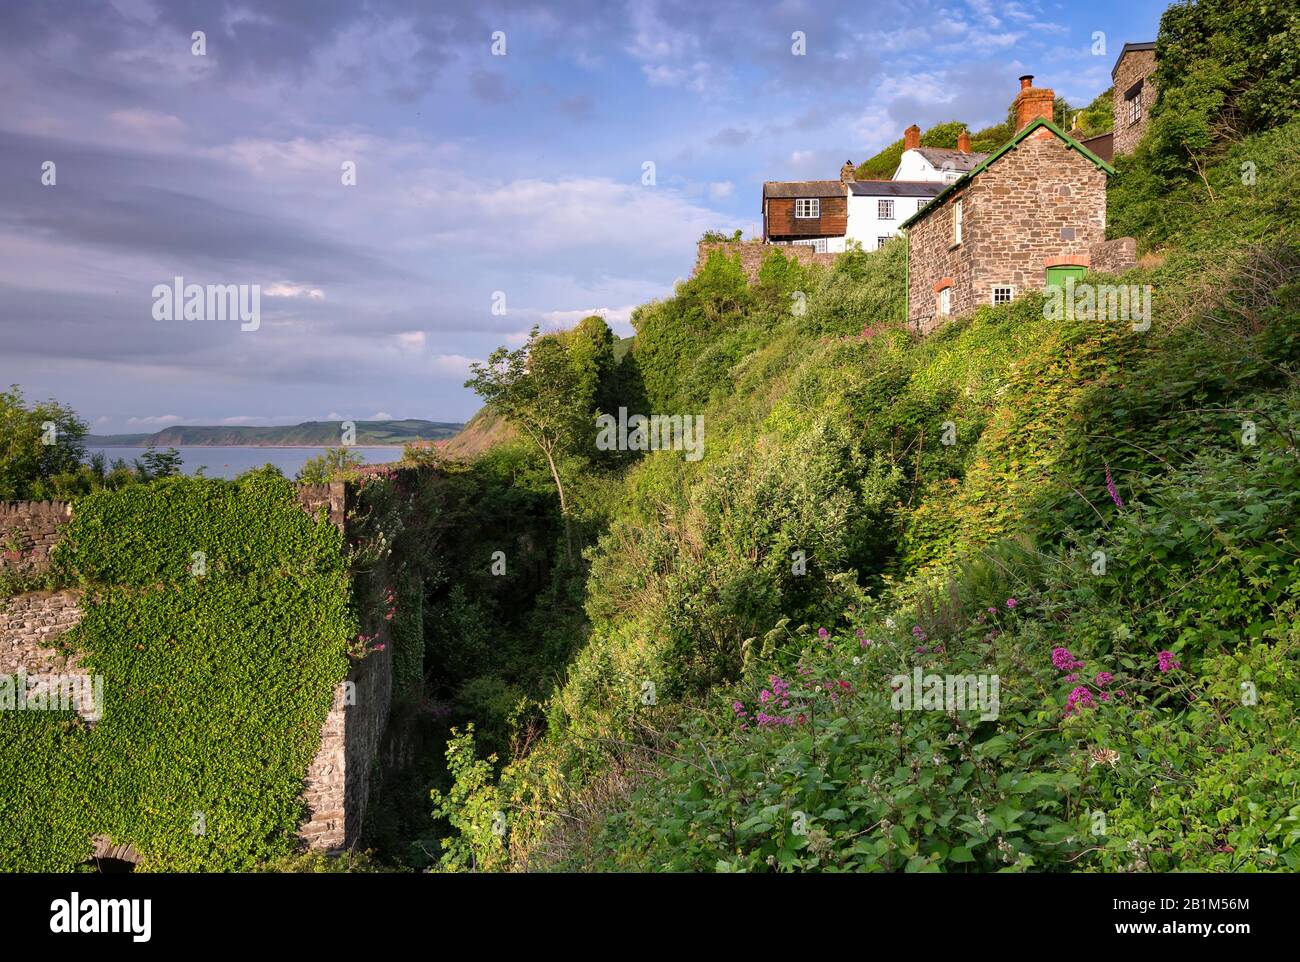 The cottages and holiday cottages at the charming holiday destination of Bucks Mills on the South West coastal path in North Devon, South West, Uk Stock Photo